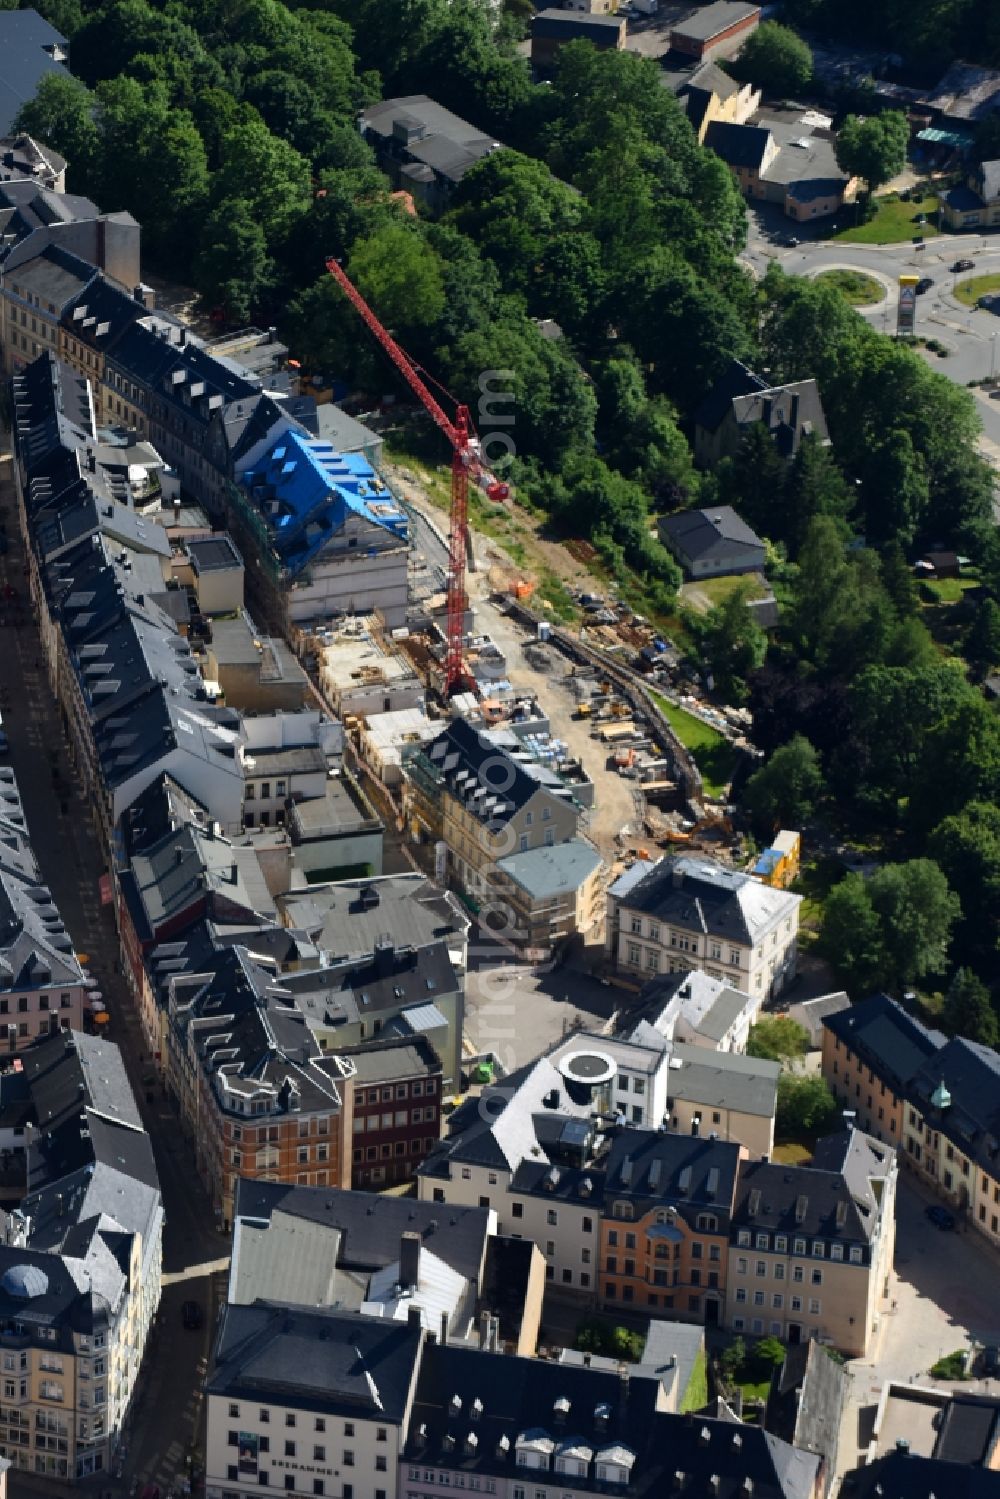 Aerial image Annaberg-Buchholz - Construction site to build a new multi-family residential complex a?? Altstadtwohnen in Muenzviertel a?? on Johannisgasse - Promenadenweg in the district Frohnau in Annaberg-Buchholz in the state Saxony, Germany